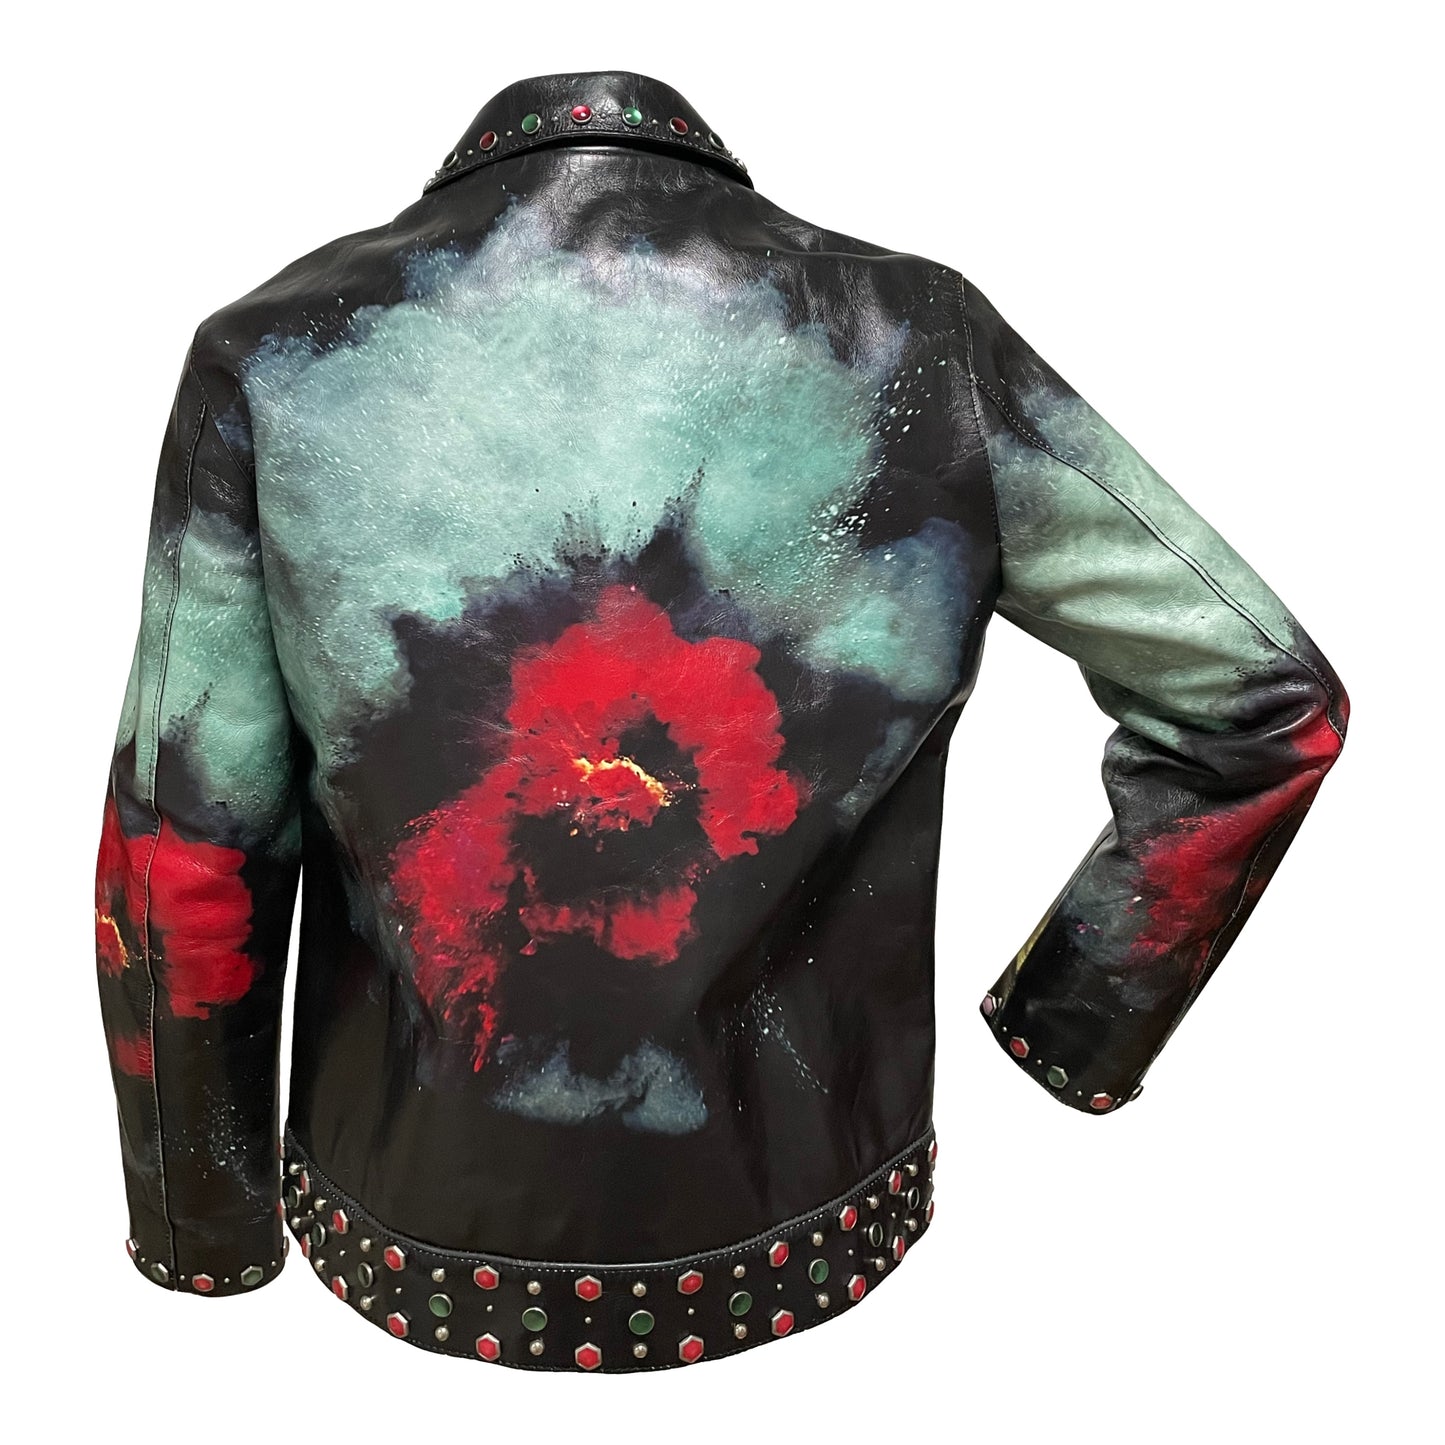 UNDERCOVER Spring Summer 2016 "Greatest" Flower Print Studs Leather Jacket